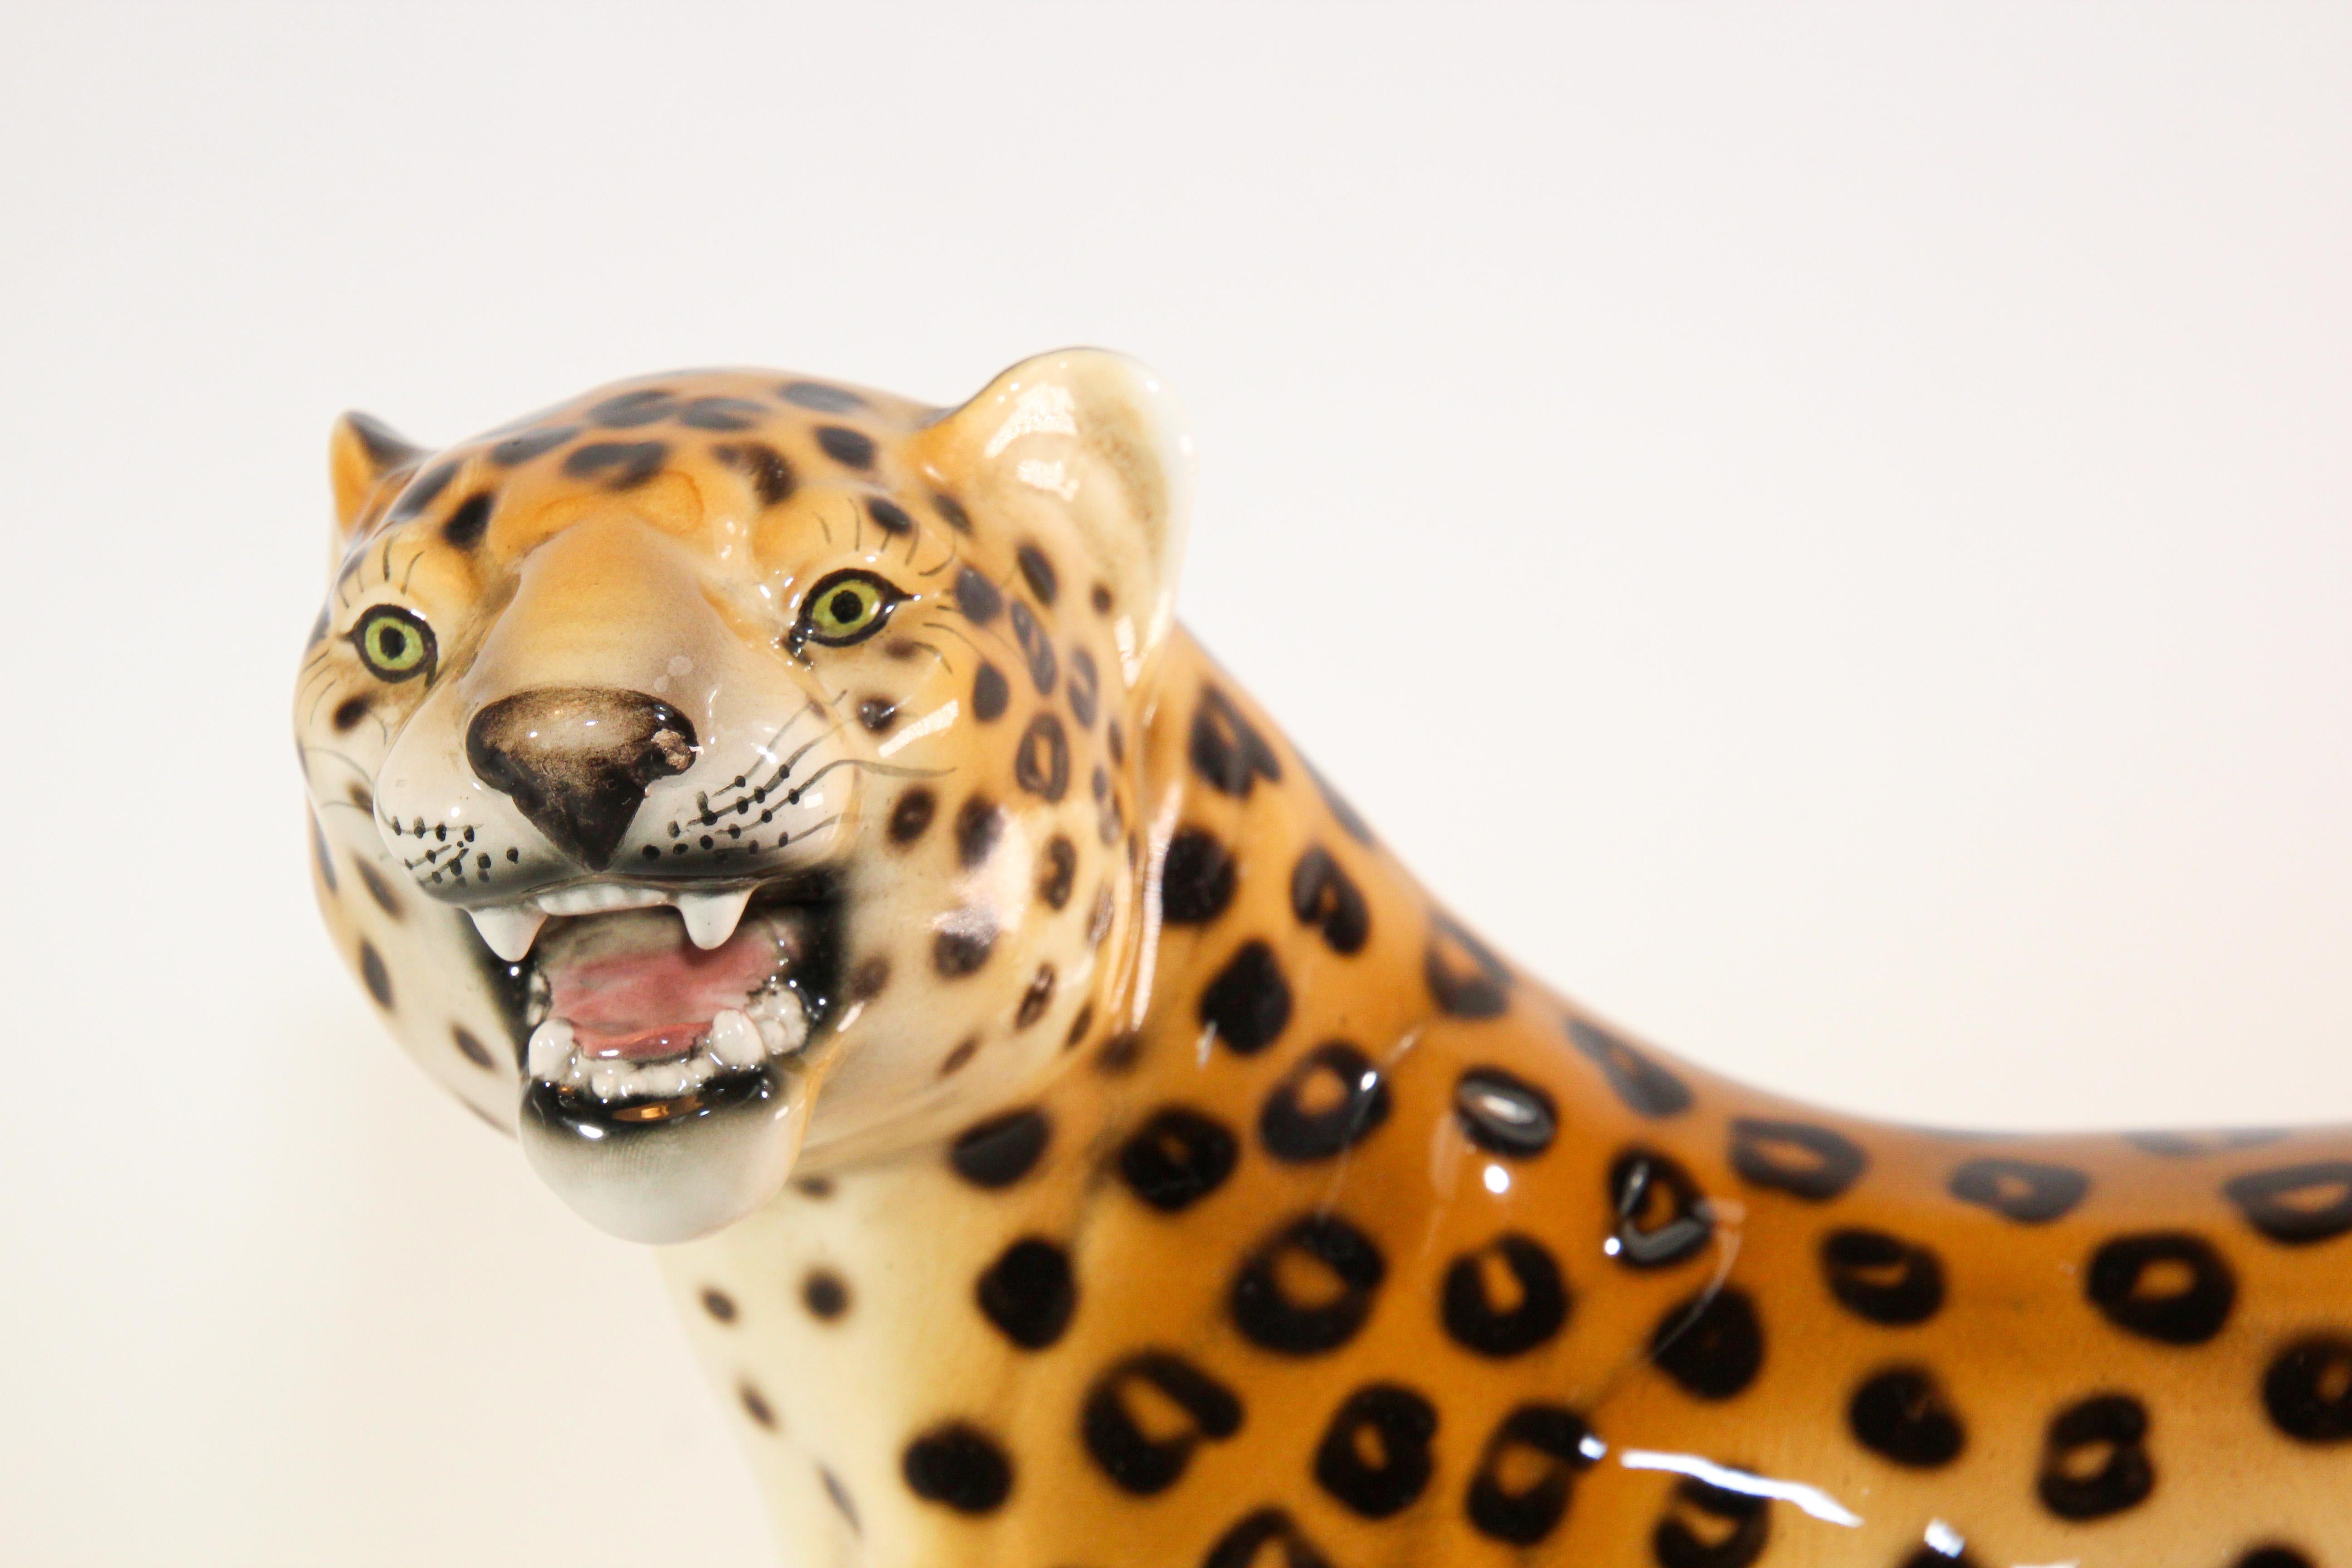 Vintage Italian Mid-Century porcelain sculpture of a leopard, mid-stride, with open mouth.
Italian hand-painted glazed porcelain standing leopard.
Mid-Century Ceramic Cheetah Leopard Sculpture, Italy, 1960s.
Hand made in Italy, marked and